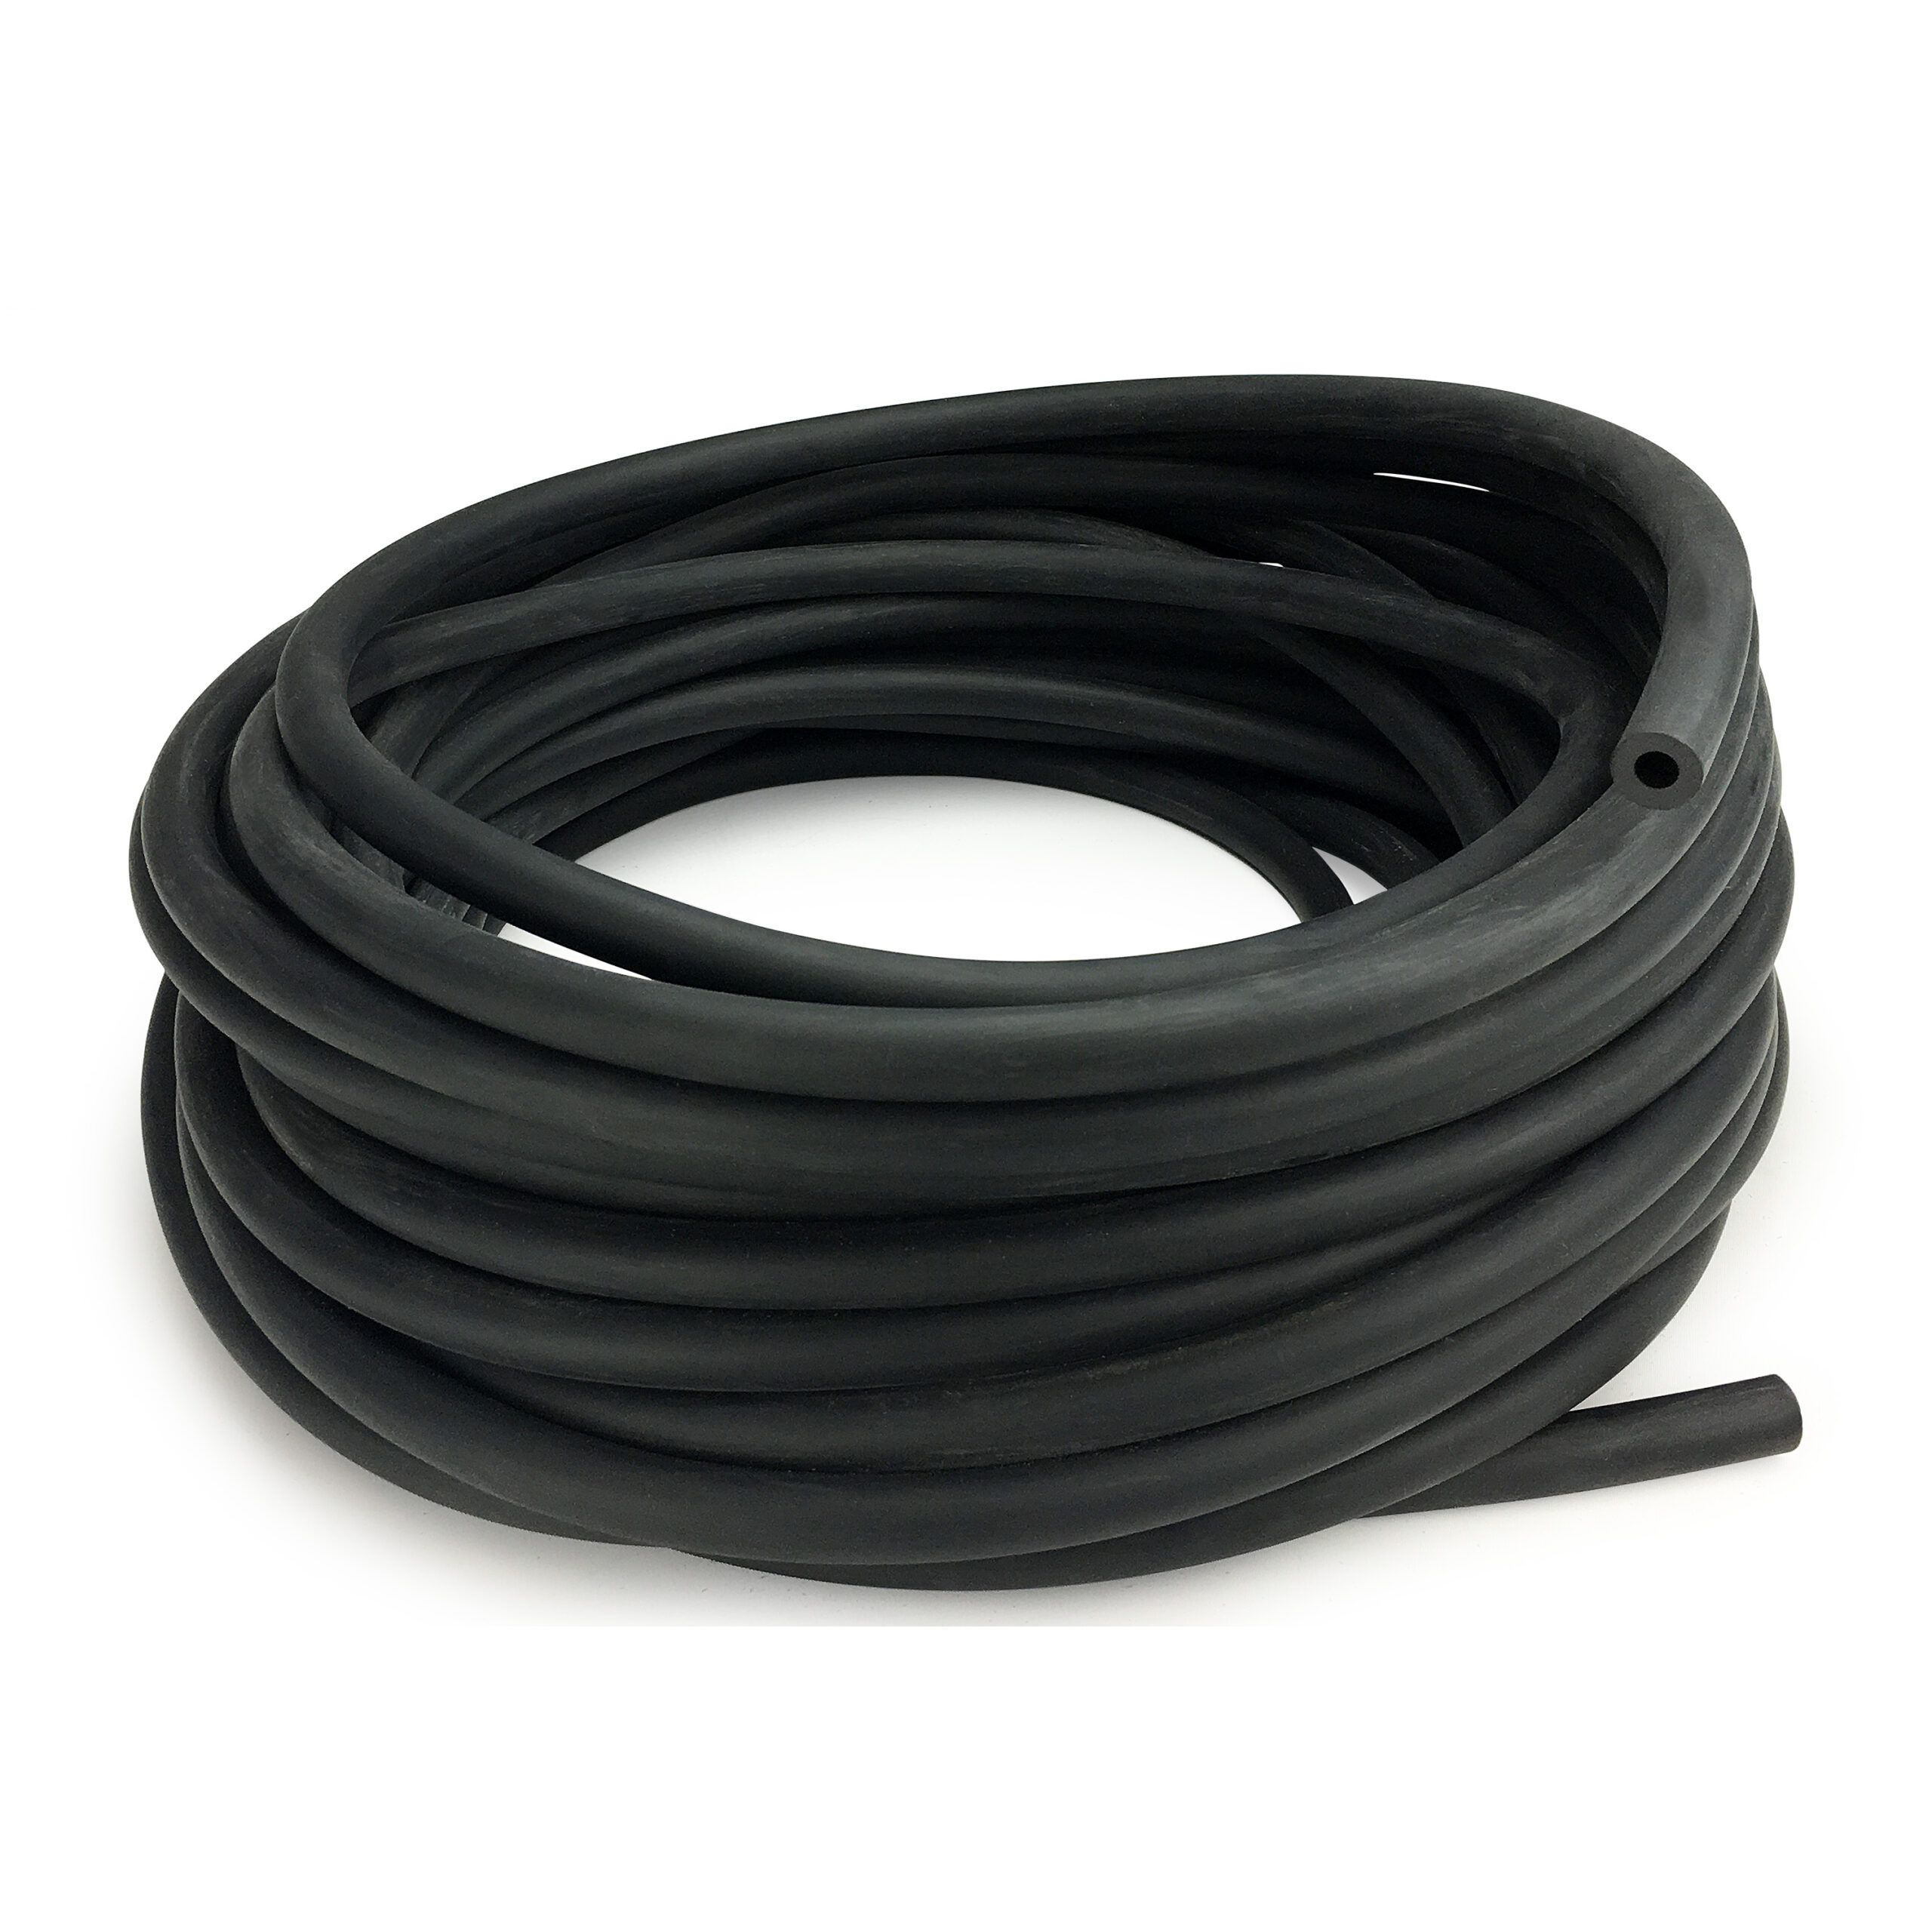 Weighted air hose